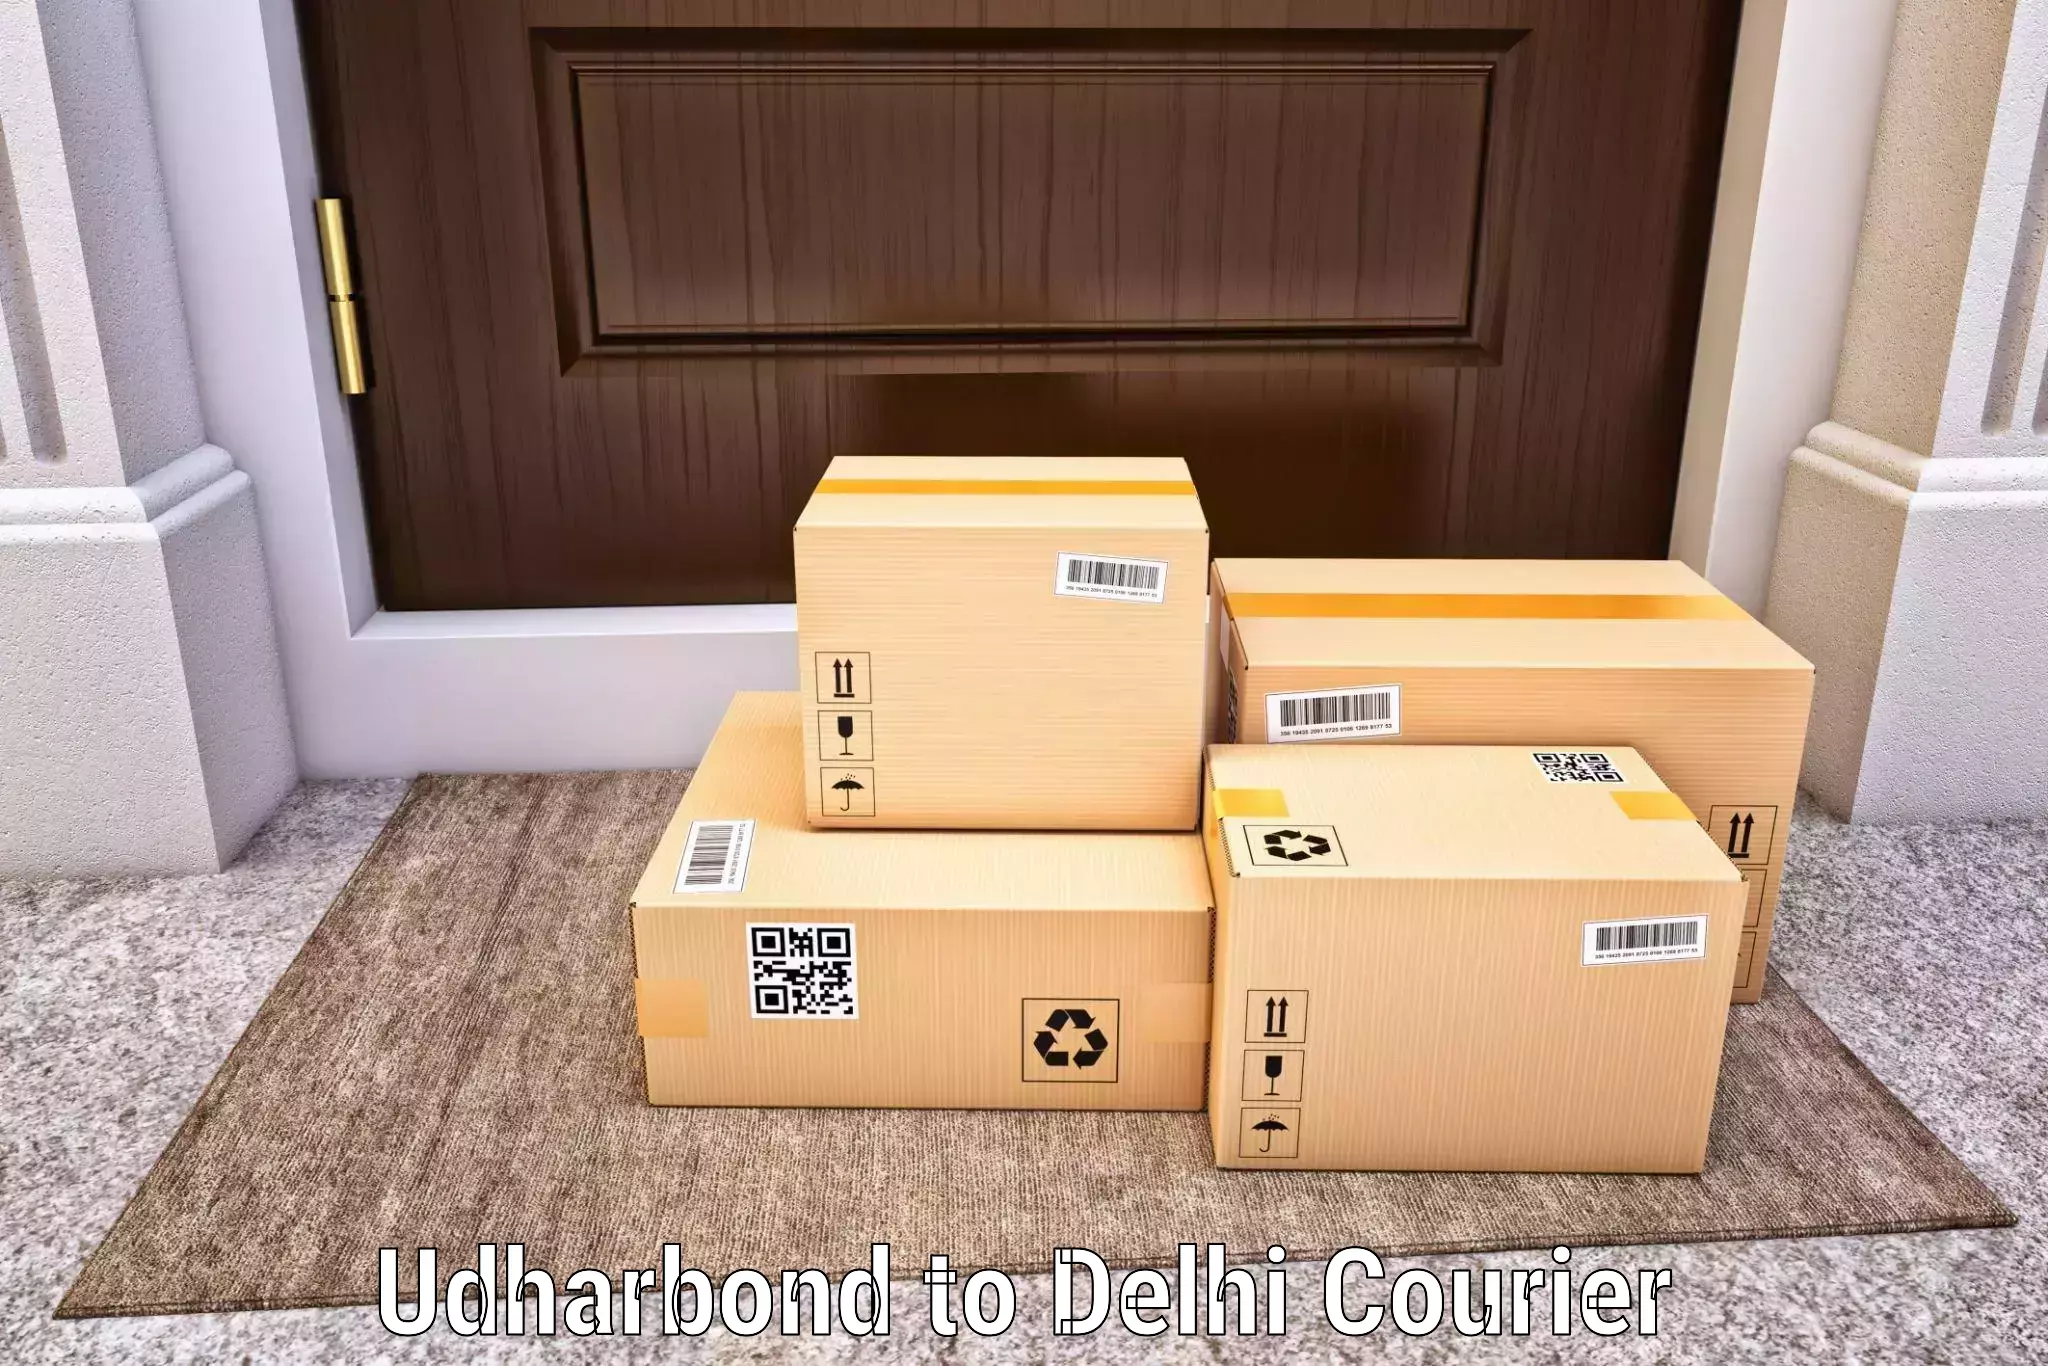 Reliable logistics providers Udharbond to NCR